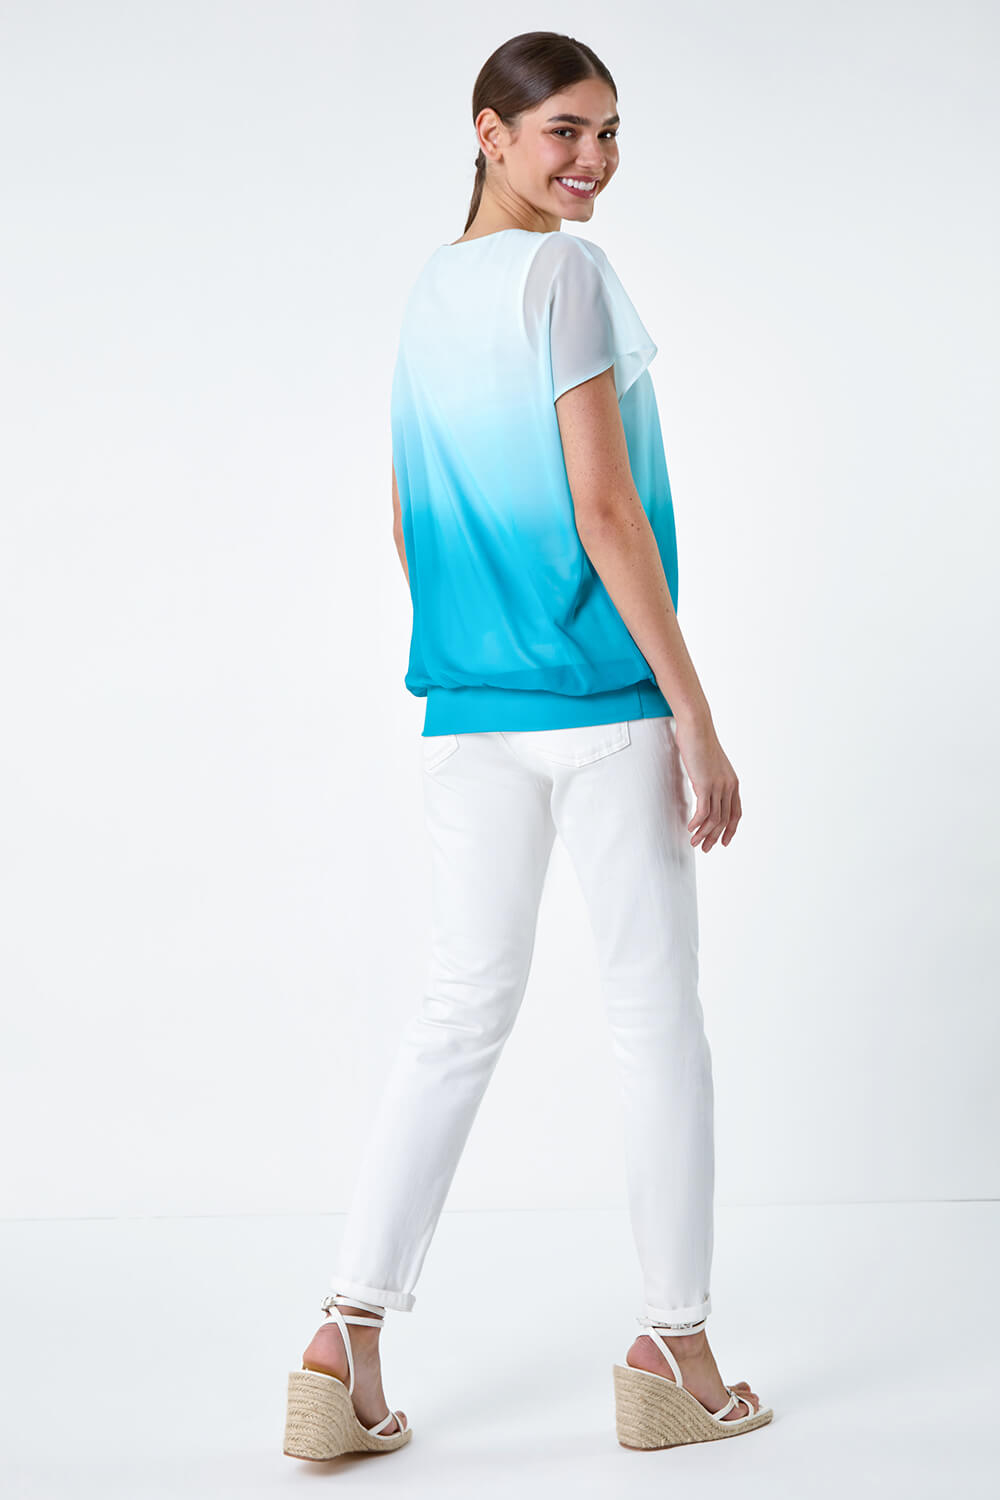 Blue Ombre Chiffon Overlay Blouson Top, Image 3 of 5